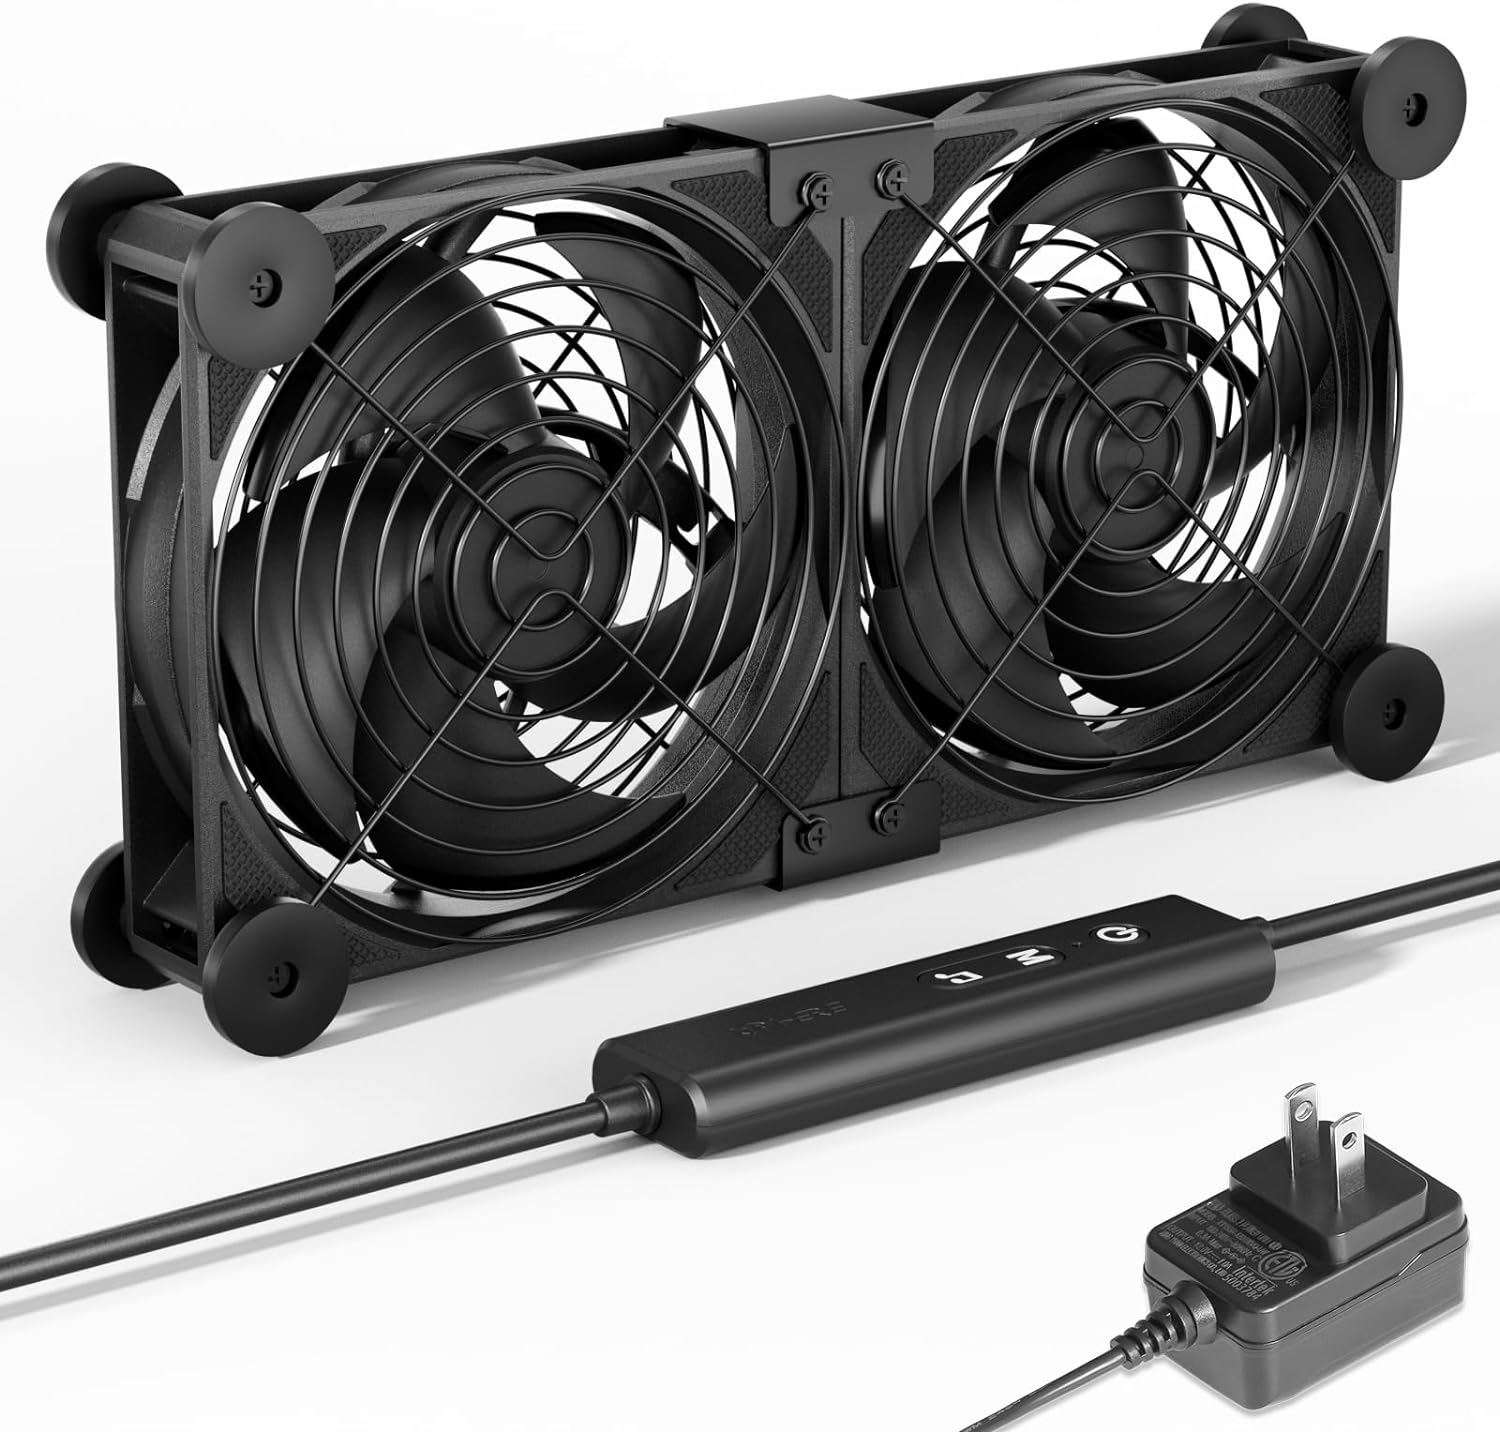 upHere Big Airflow 2 x 120mm 240mm Computer Fan with AC Plug Cabinet Fan 100V 240V AC Power Supply,DC 12V 5 Speed Controller, for Router Mining Machine Chassis Server Workstation Cooling